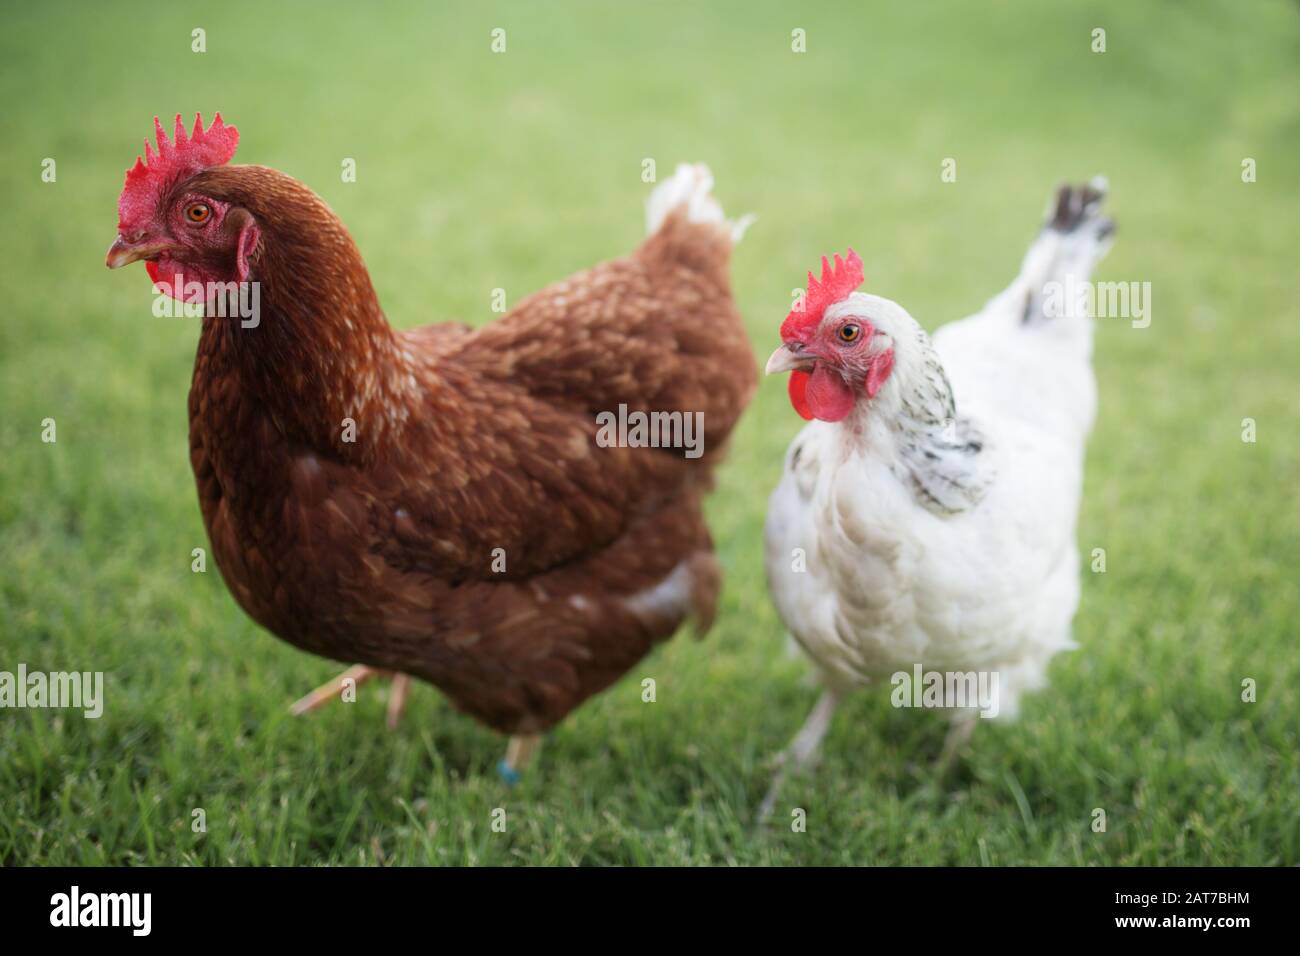 red brown isa and small white sussex chickens (Gallus gallus domesticus) standing next to each other on green grass on a free range chicken farm Stock Photo